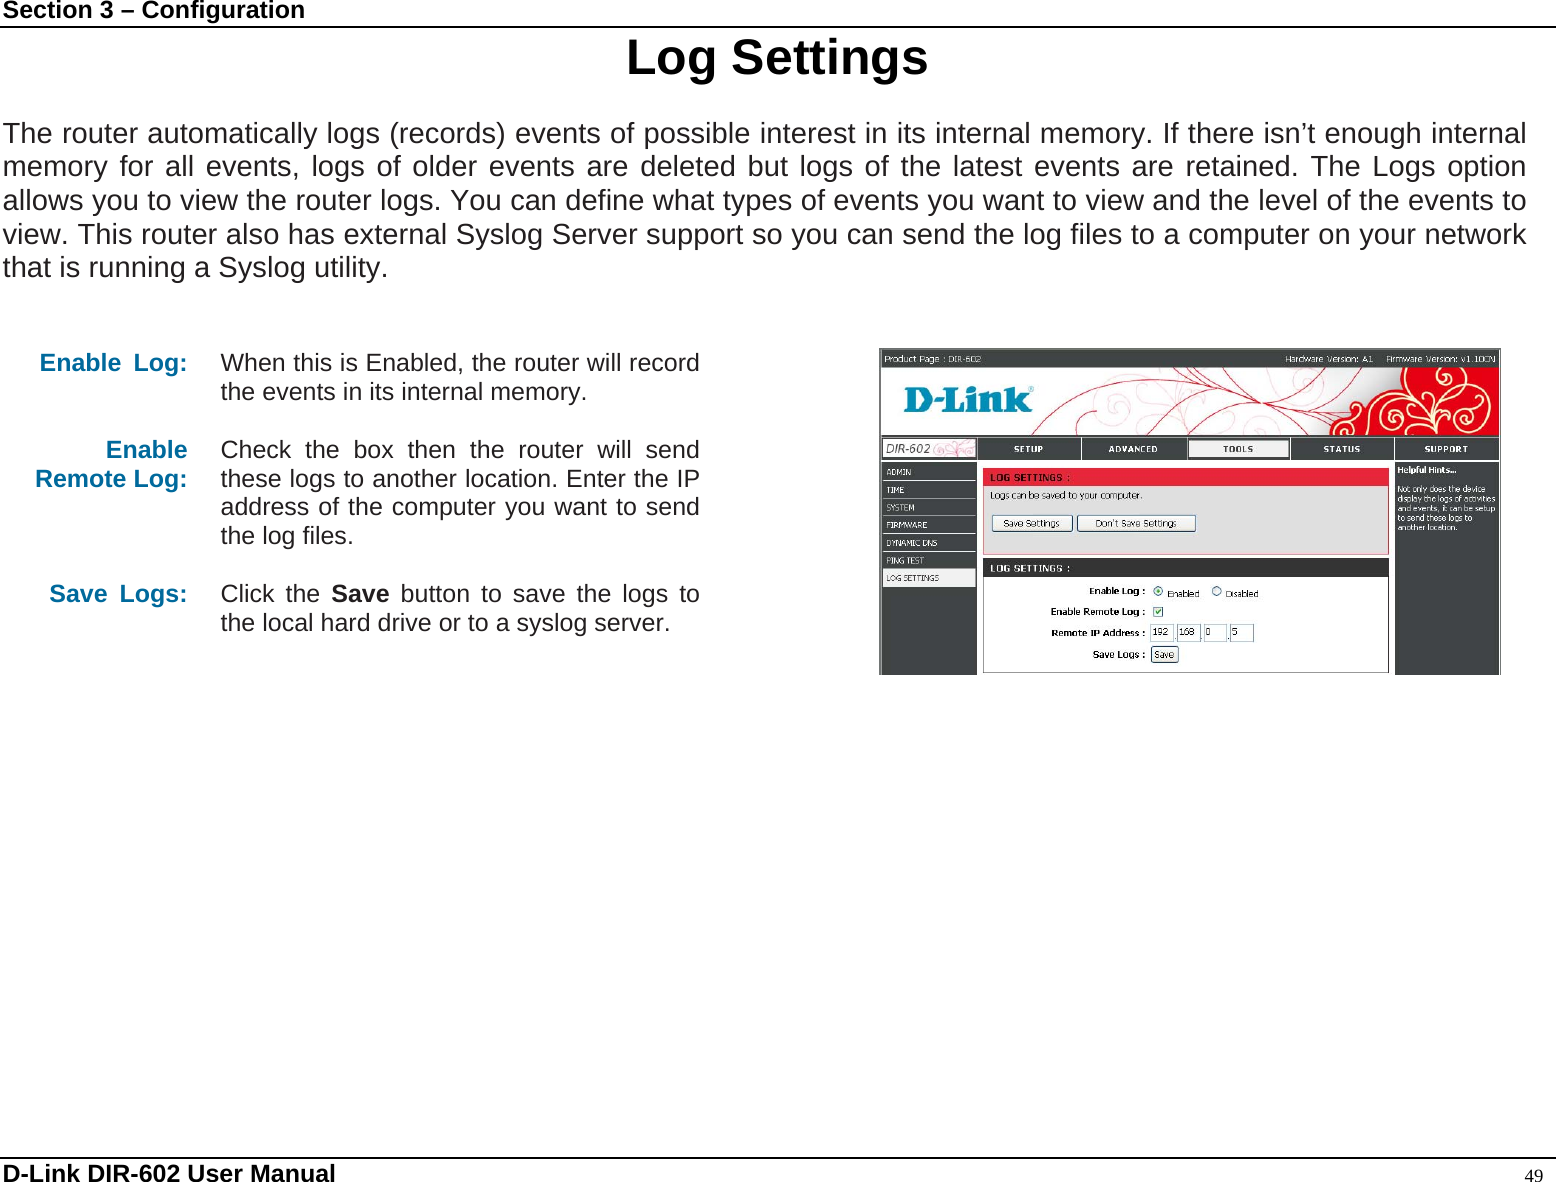 Section 3 – Configuration  Log Settings  The router automatically logs (records) events of possible interest in its internal memory. If there isn’t enough internal memory for all events, logs of older events are deleted but logs of the latest events are retained. The Logs option allows you to view the router logs. You can define what types of events you want to view and the level of the events to view. This router also has external Syslog Server support so you can send the log files to a computer on your network that is running a Syslog utility.   Enable Log:  When this is Enabled, the router will record the events in its internal memory.  Enable Remote Log:   Check the box then the router will send these logs to another location. Enter the IP address of the computer you want to send the log files.  Save Logs:  Click the Save button to save the logs to the local hard drive or to a syslog server.      D-Link DIR-602 User Manual                                                                                               49 